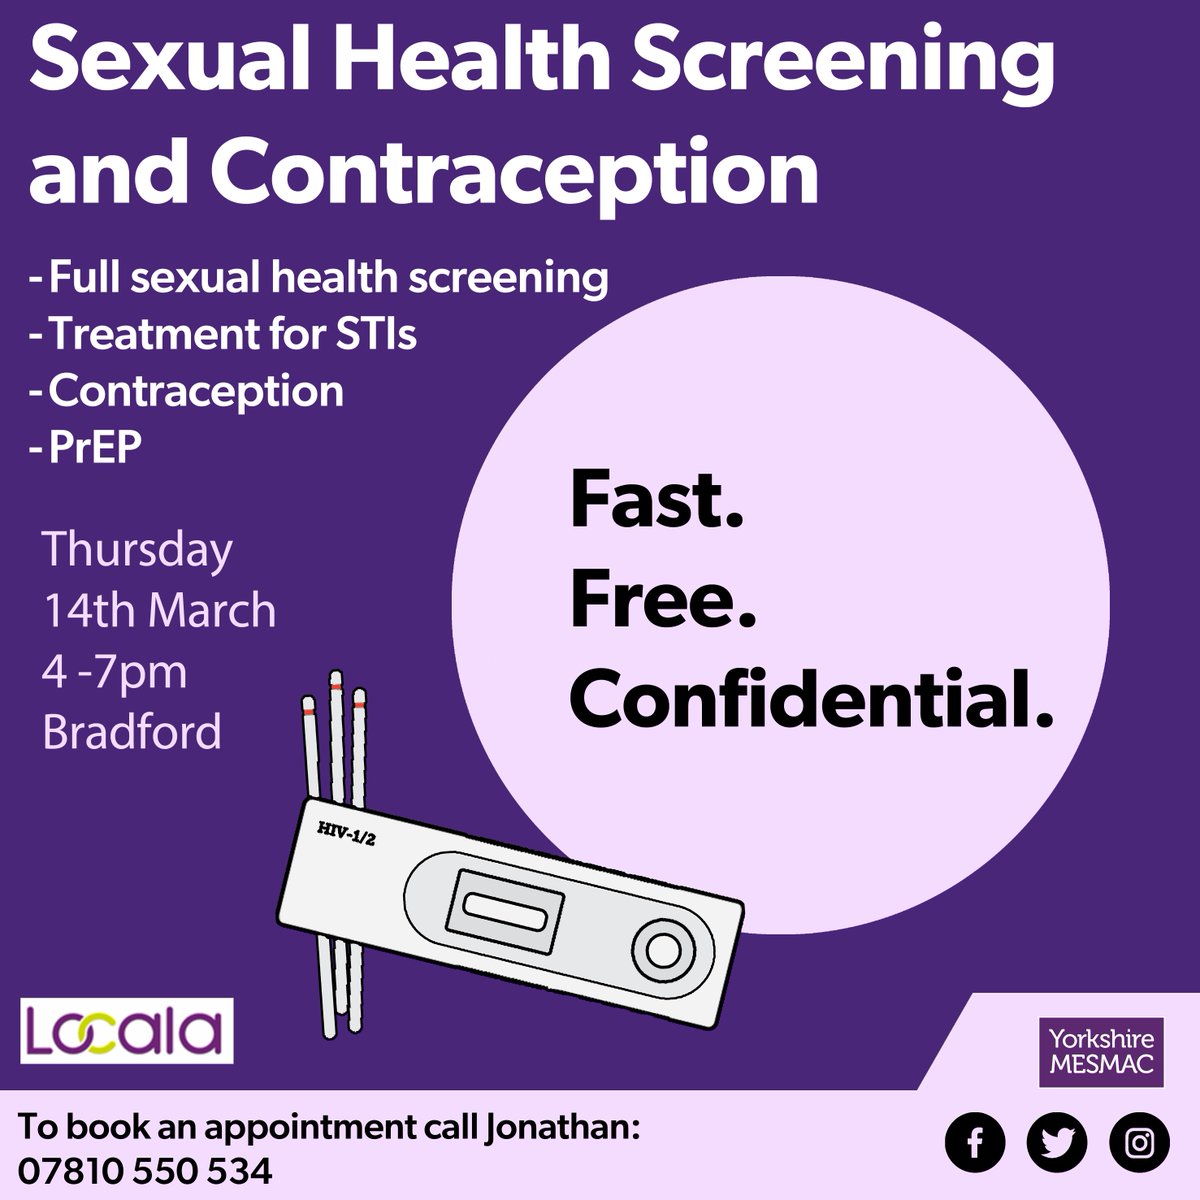 Think you’ve been at risk and need a full sexual health screening? We're running a clinic with @locala_safesex every month Get tested for Gonorrhoea, Chlamydia, HIV and Syphilis! Call Jonathan to book an appointment: 📞 07810 550 534 #sexualhealth #lgbtq #PrEP #contraception